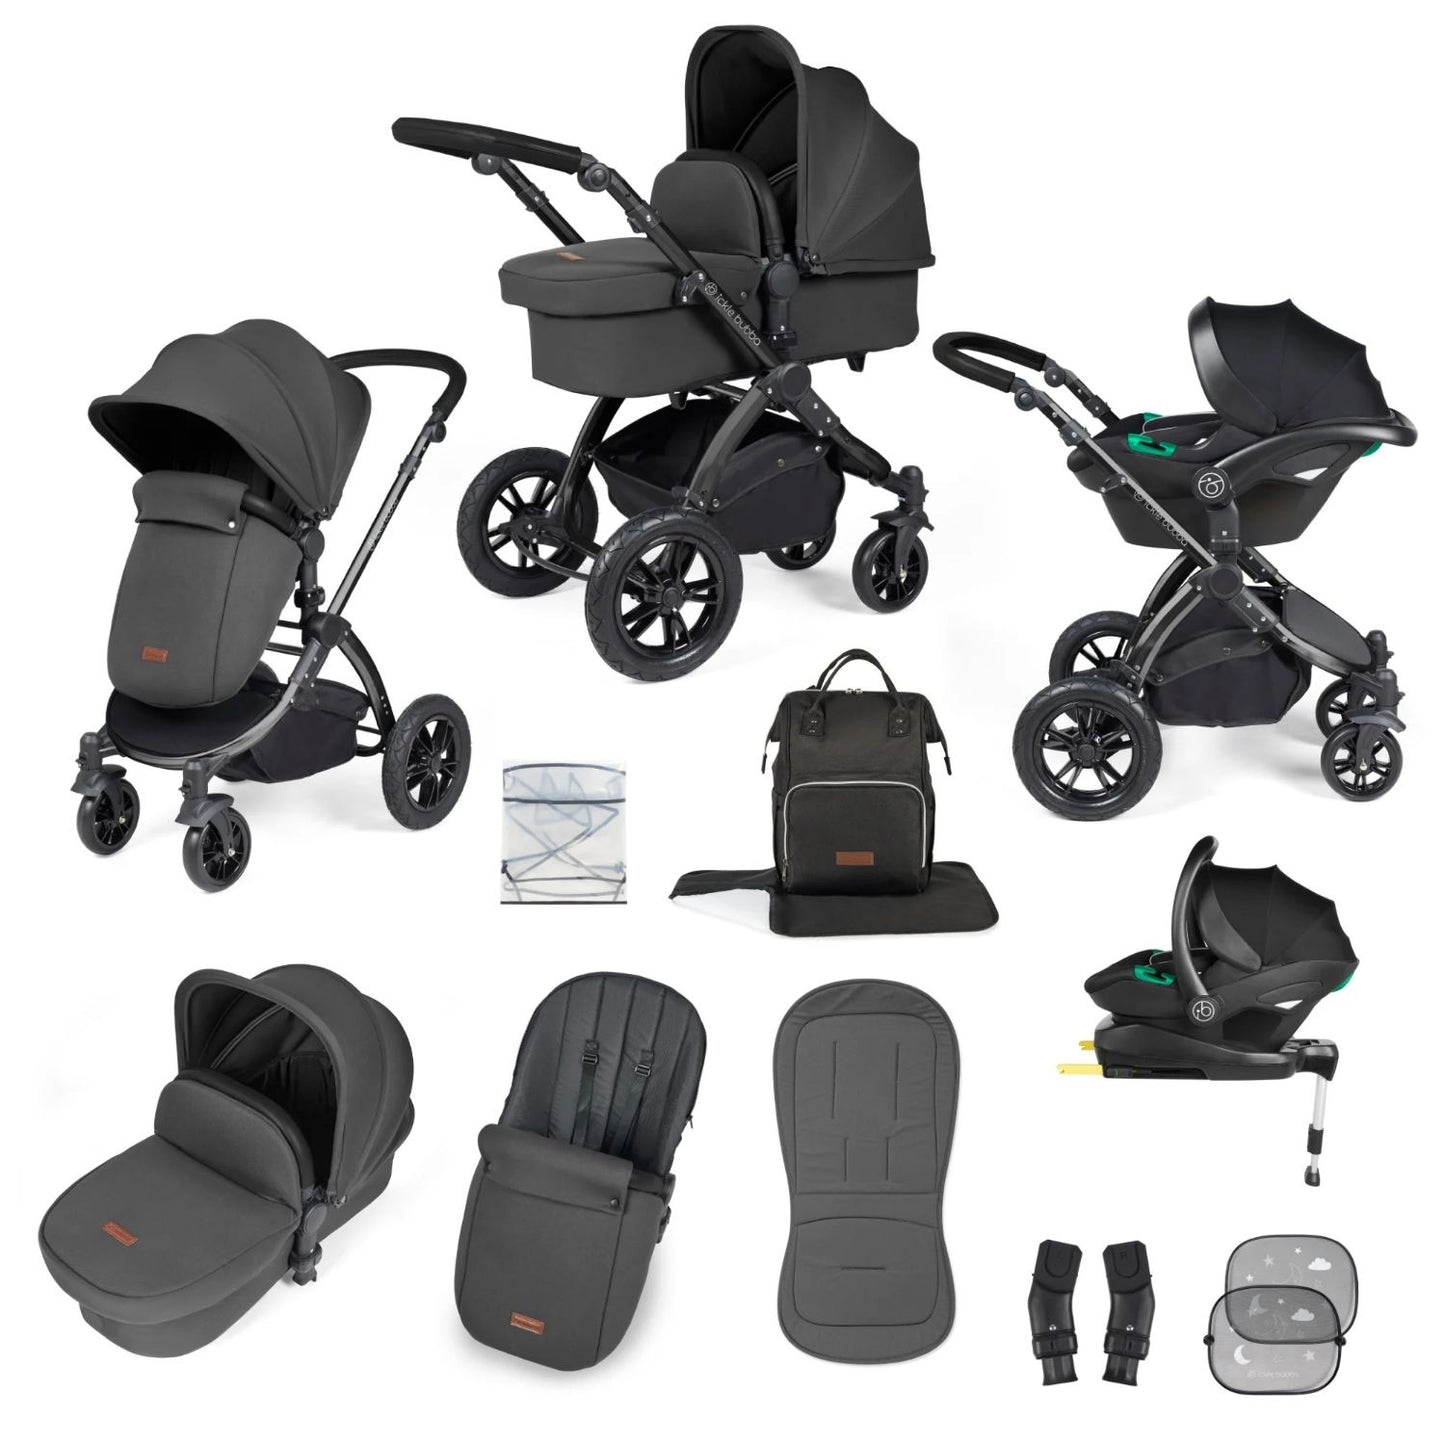 Ickle Bubba Stomp Luxe All-in-One Travel System with Stratus i-Size Car Seat and ISOFIX Base and accessories in Charcoal Grey colour